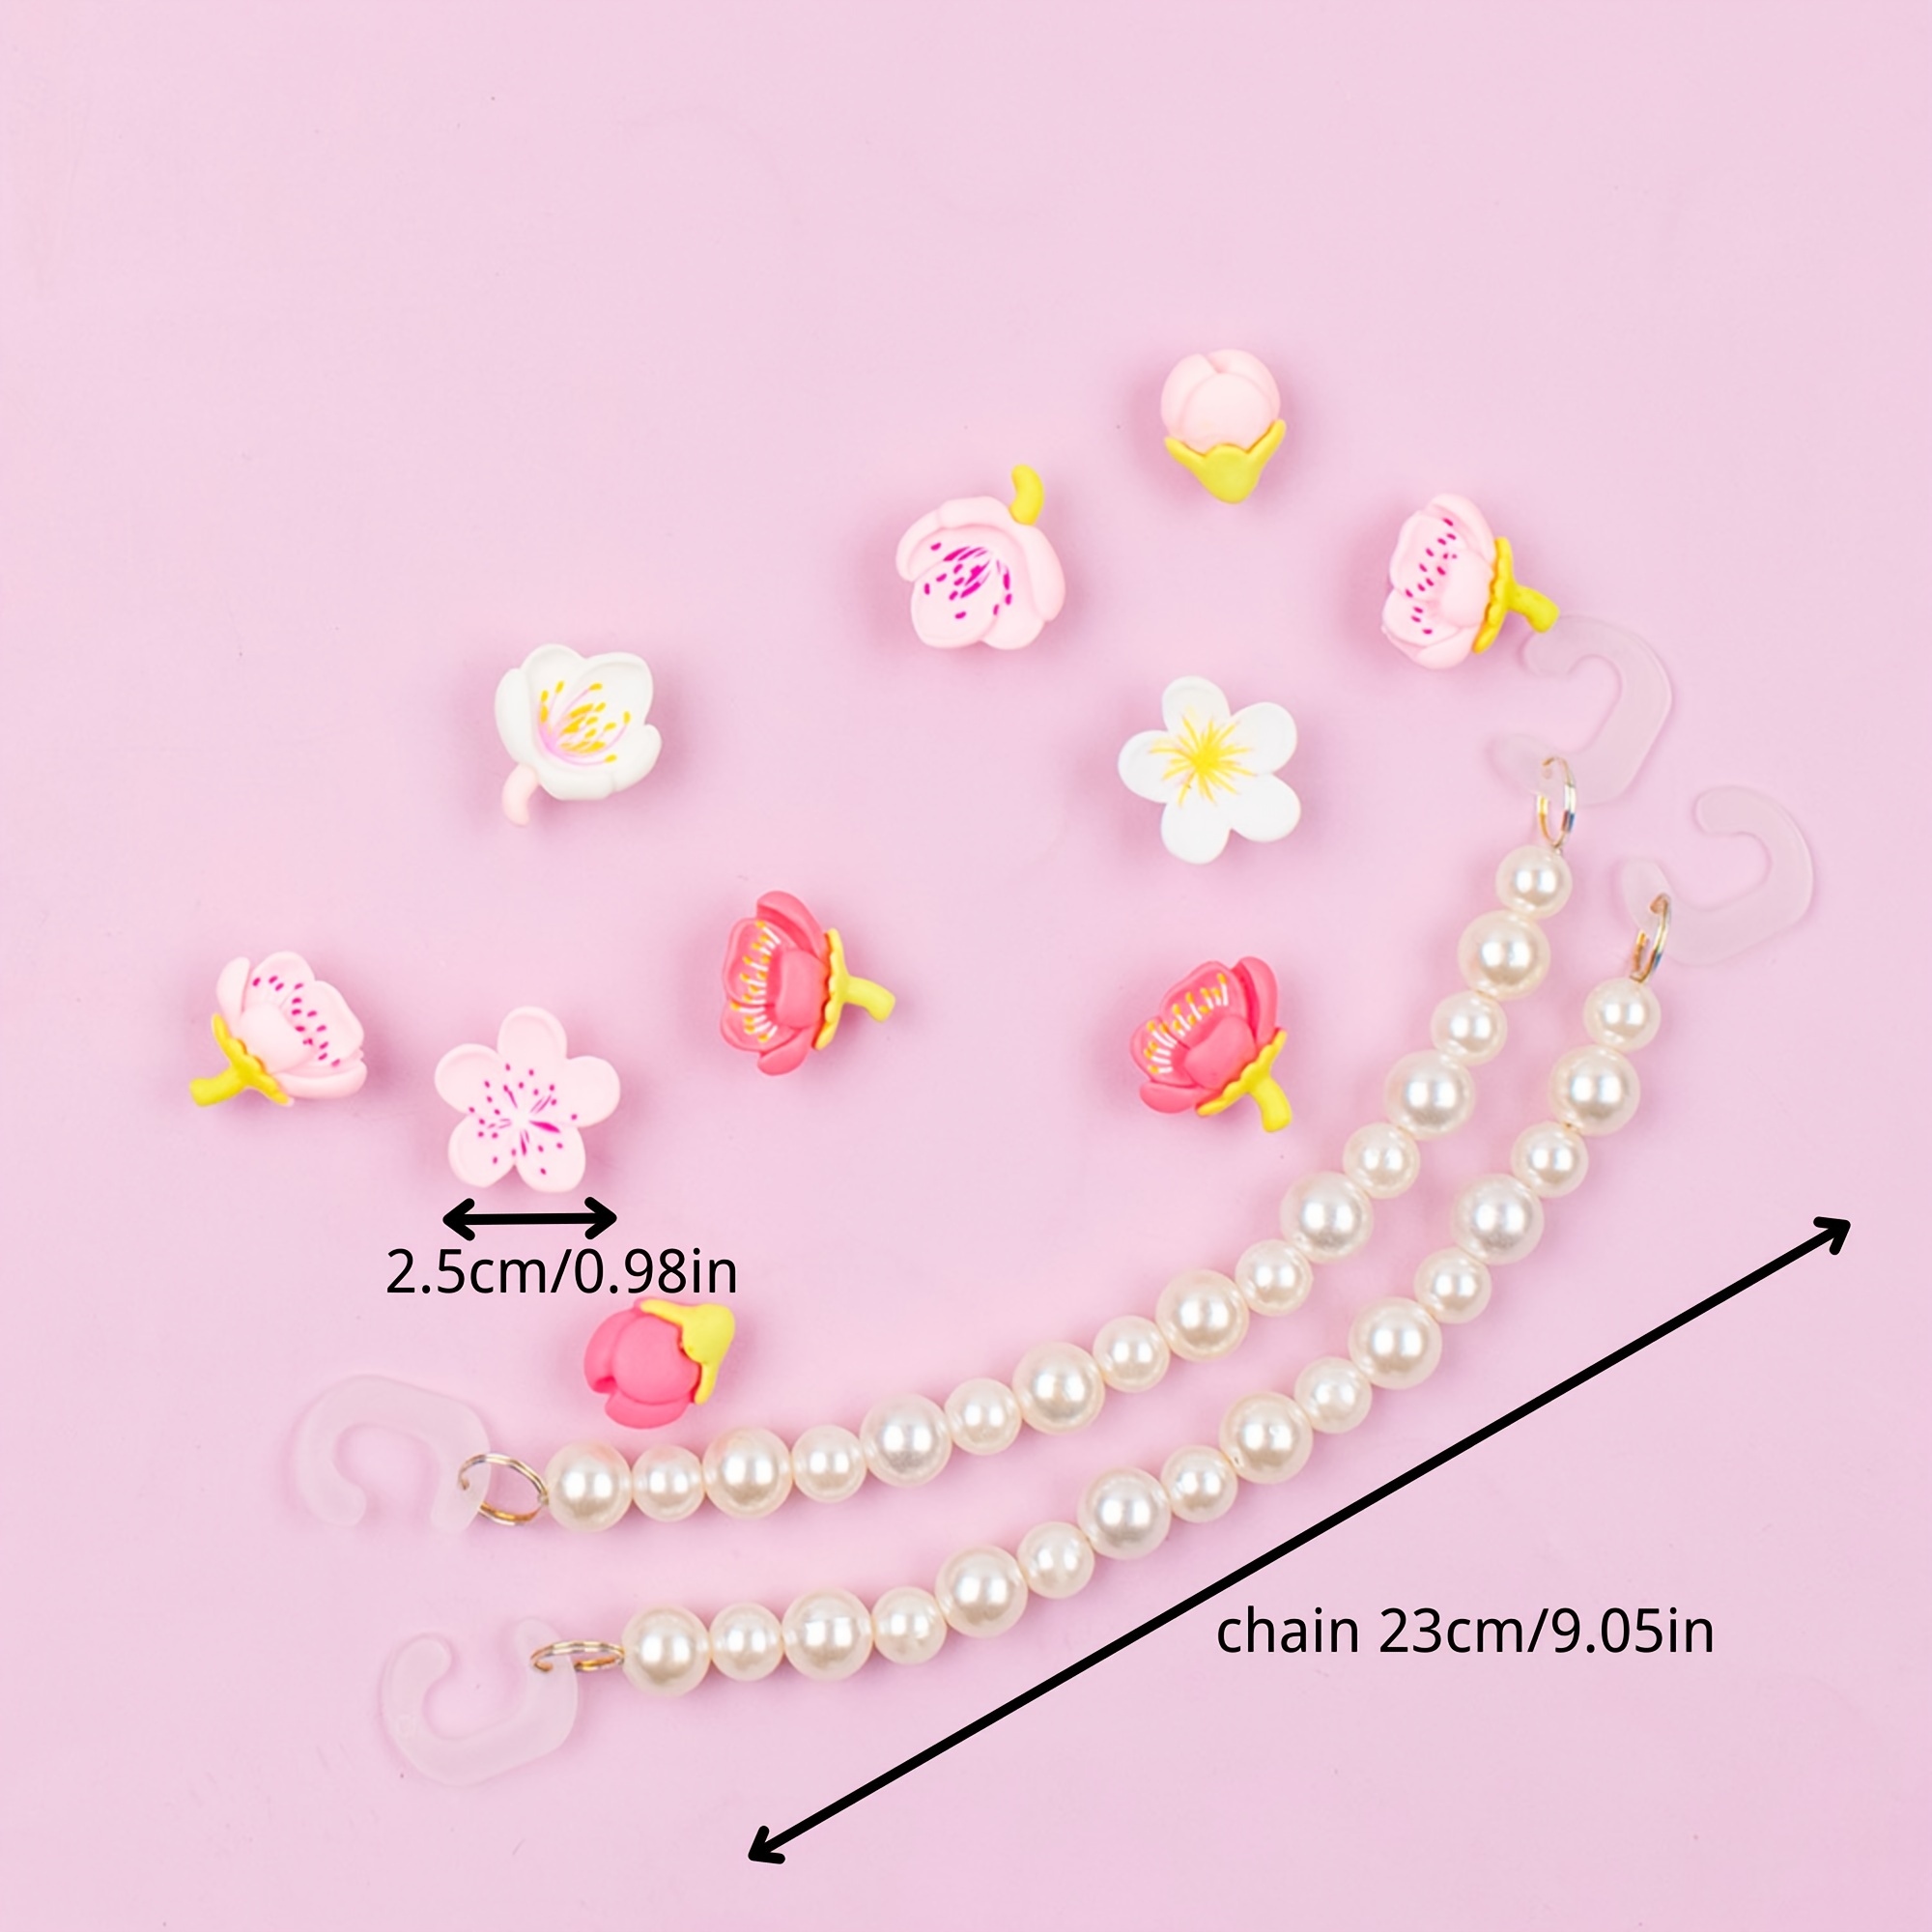 Cute Shoe for Crocs Charms Chain Accessories Women Kids Buttons